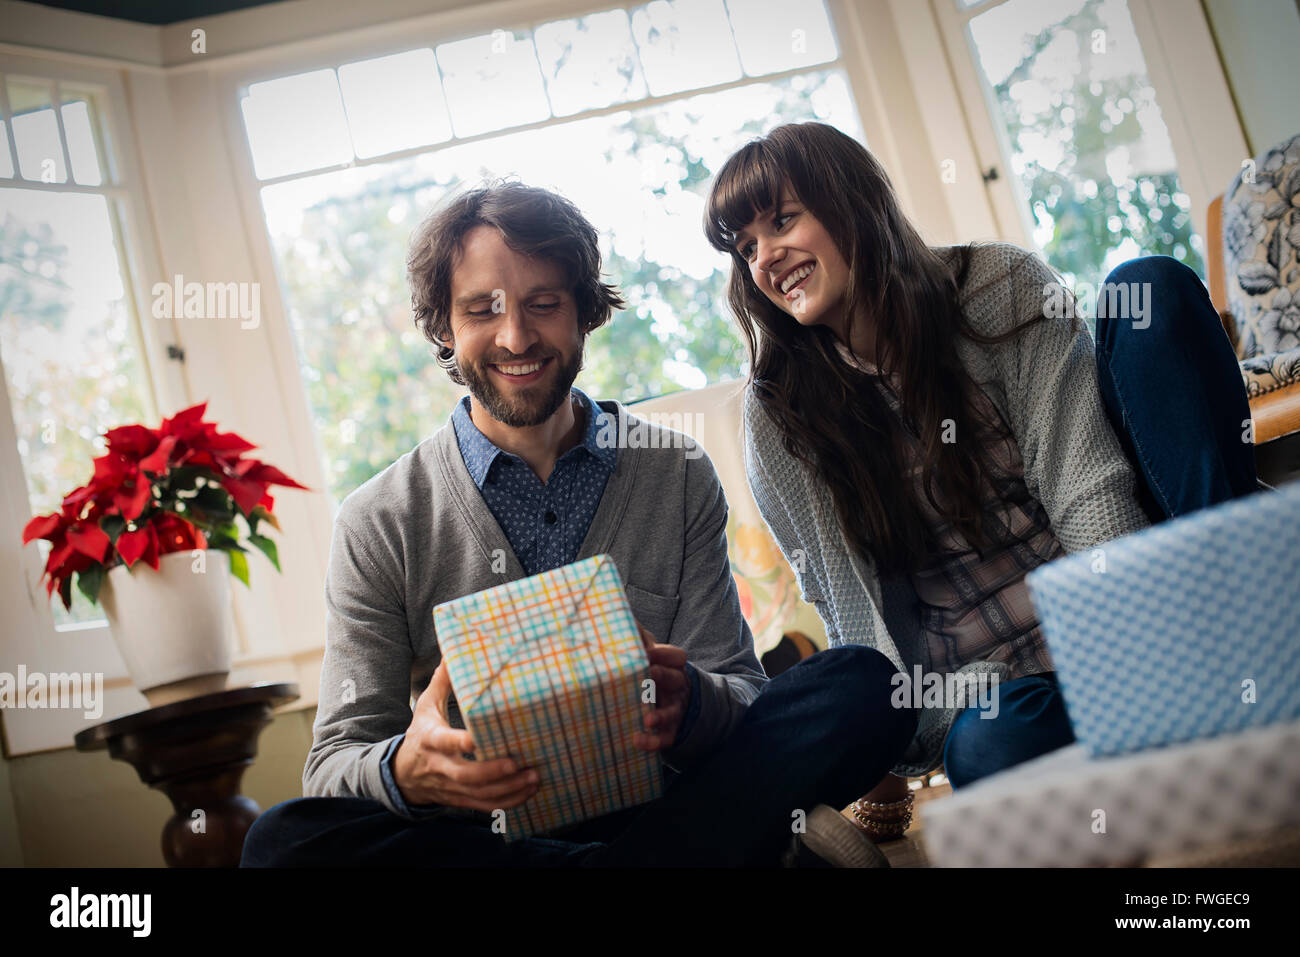 A couple on a sofa, exchanging wrapped presents. Stock Photo